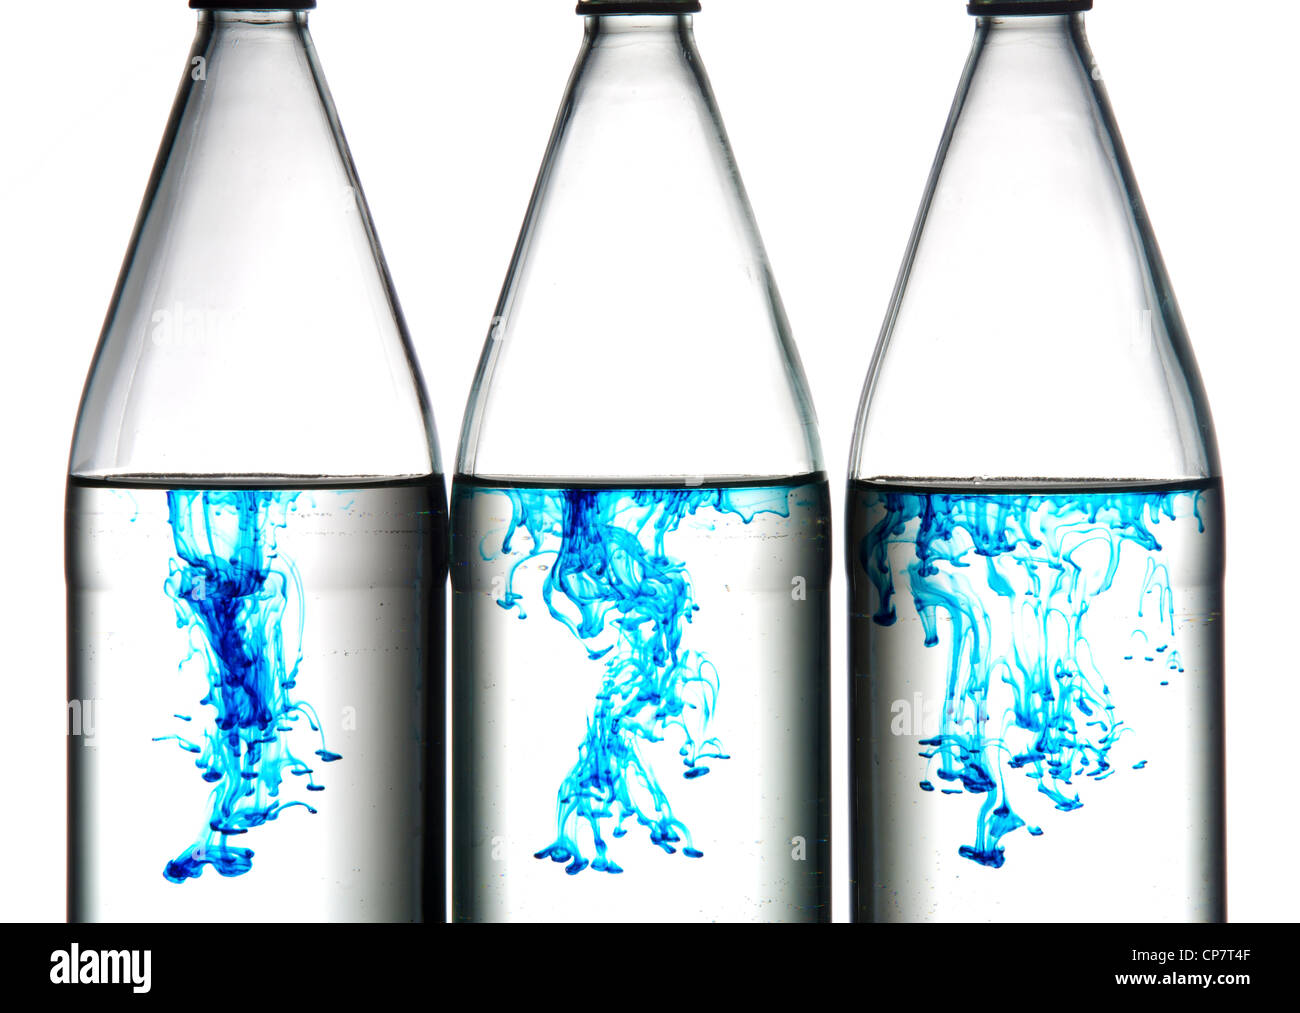 Blue food coloring makes interesting designs in bottles of water. Stock Photo